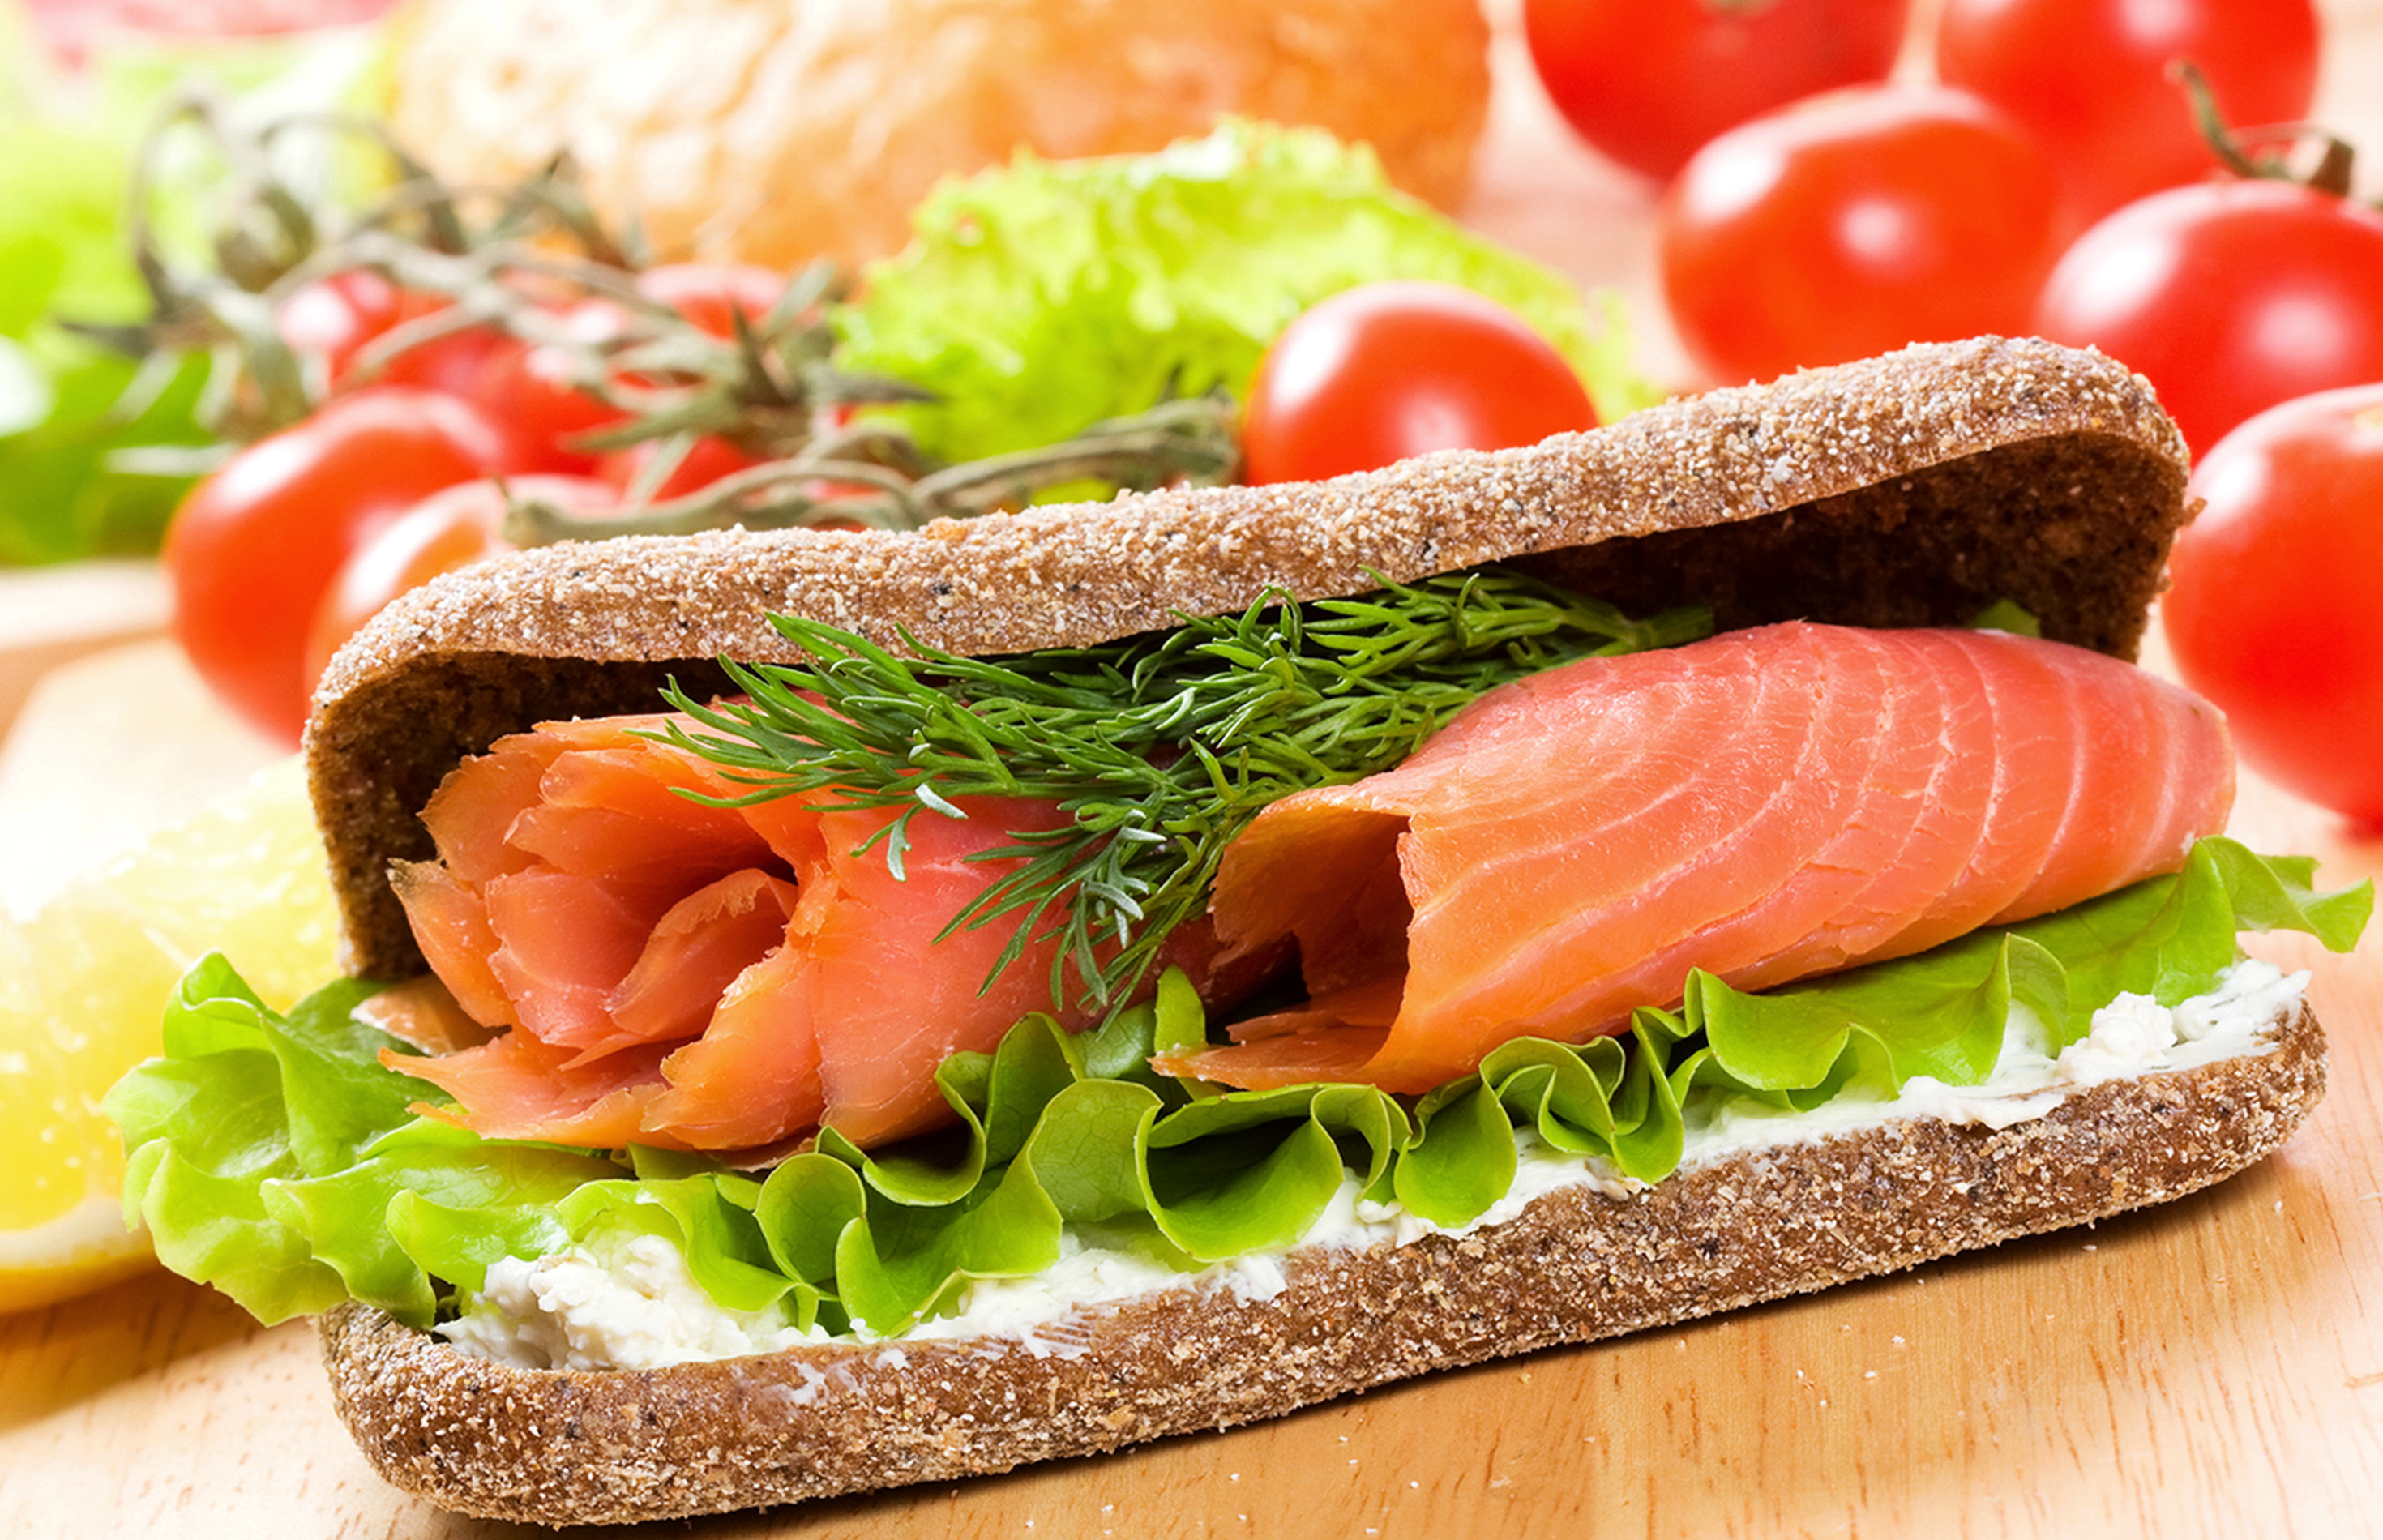 Sandwich Wallpapers, Pictures, Images